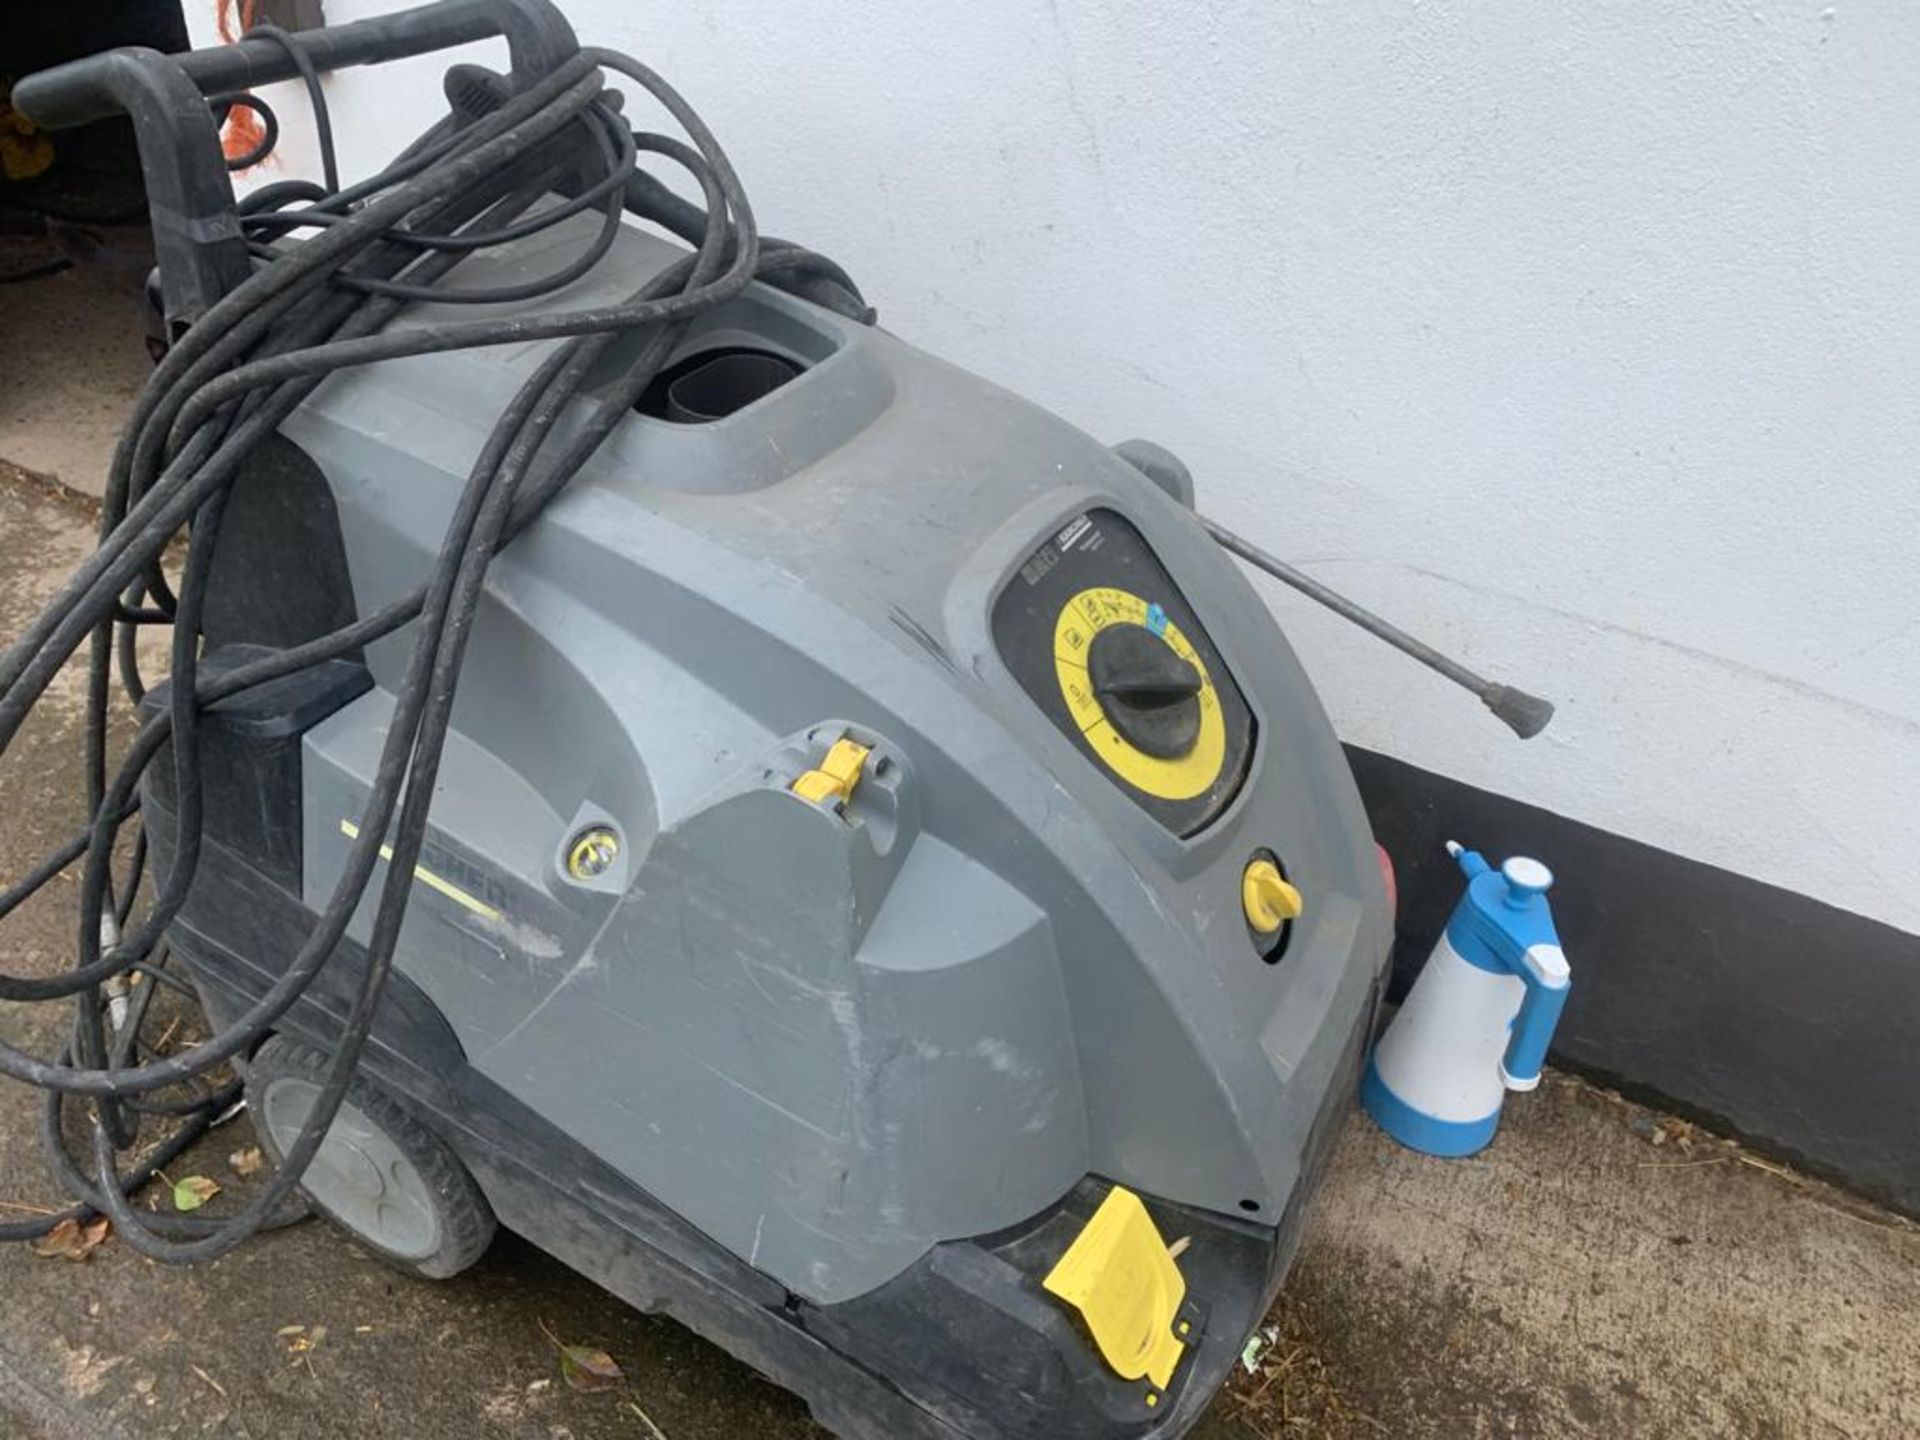 KARCHER DIESEL HOT AND COLD POWER WASHER 240V LOCATION N IRELAND - Image 2 of 3